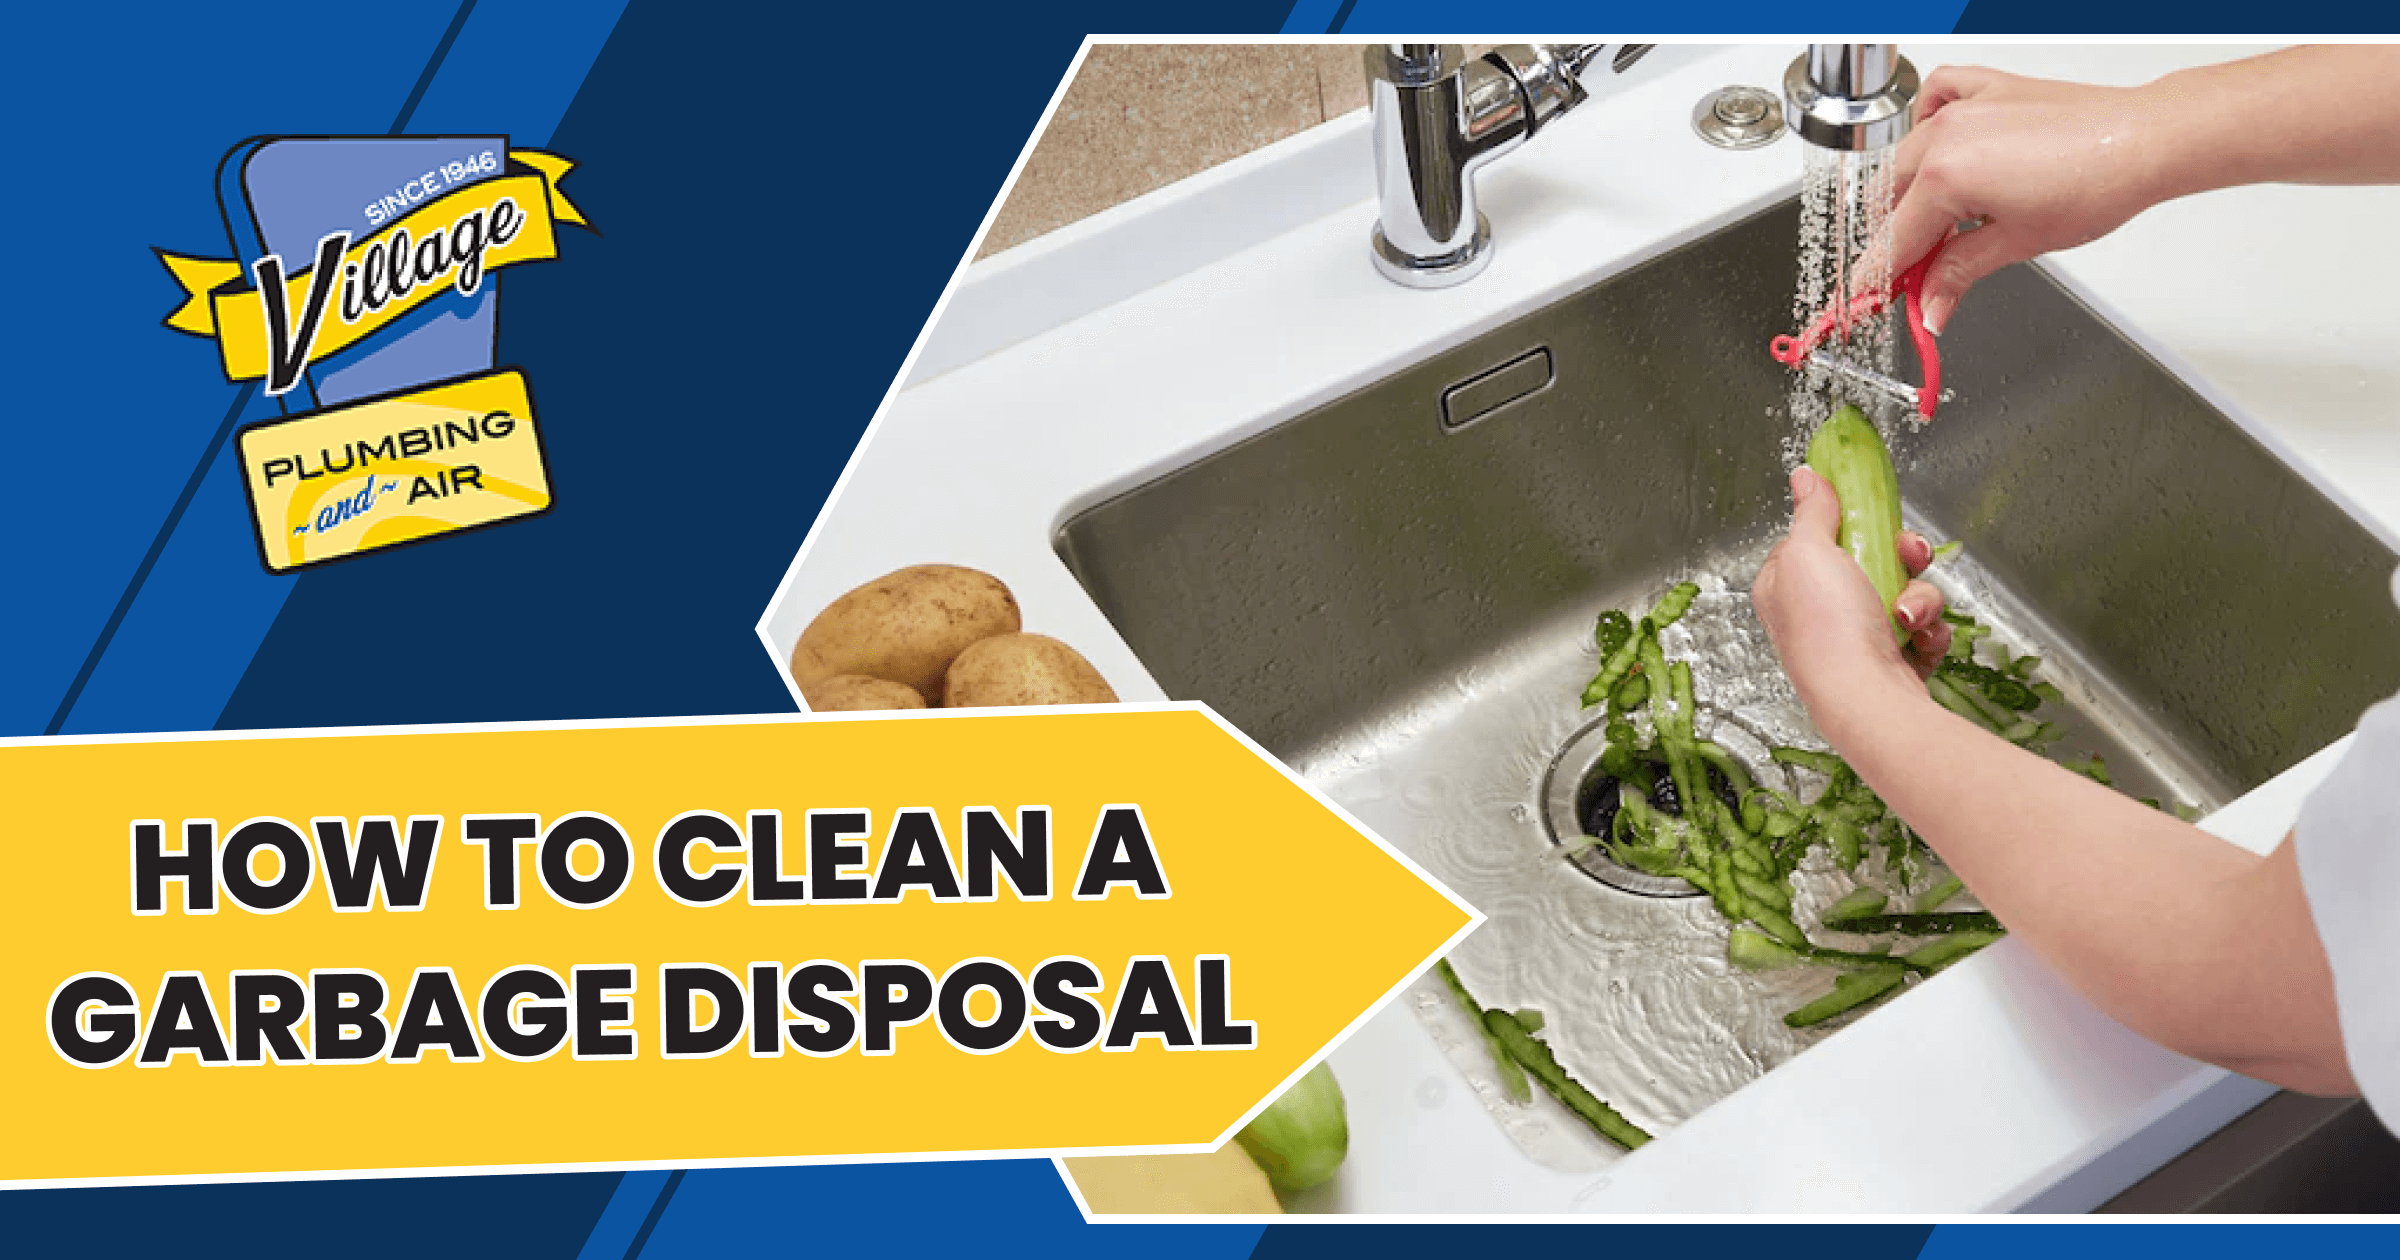 https://villageplumbing.com/wp-content/uploads/2022/07/How-to-Clean-a-Garbage-Disposal.png